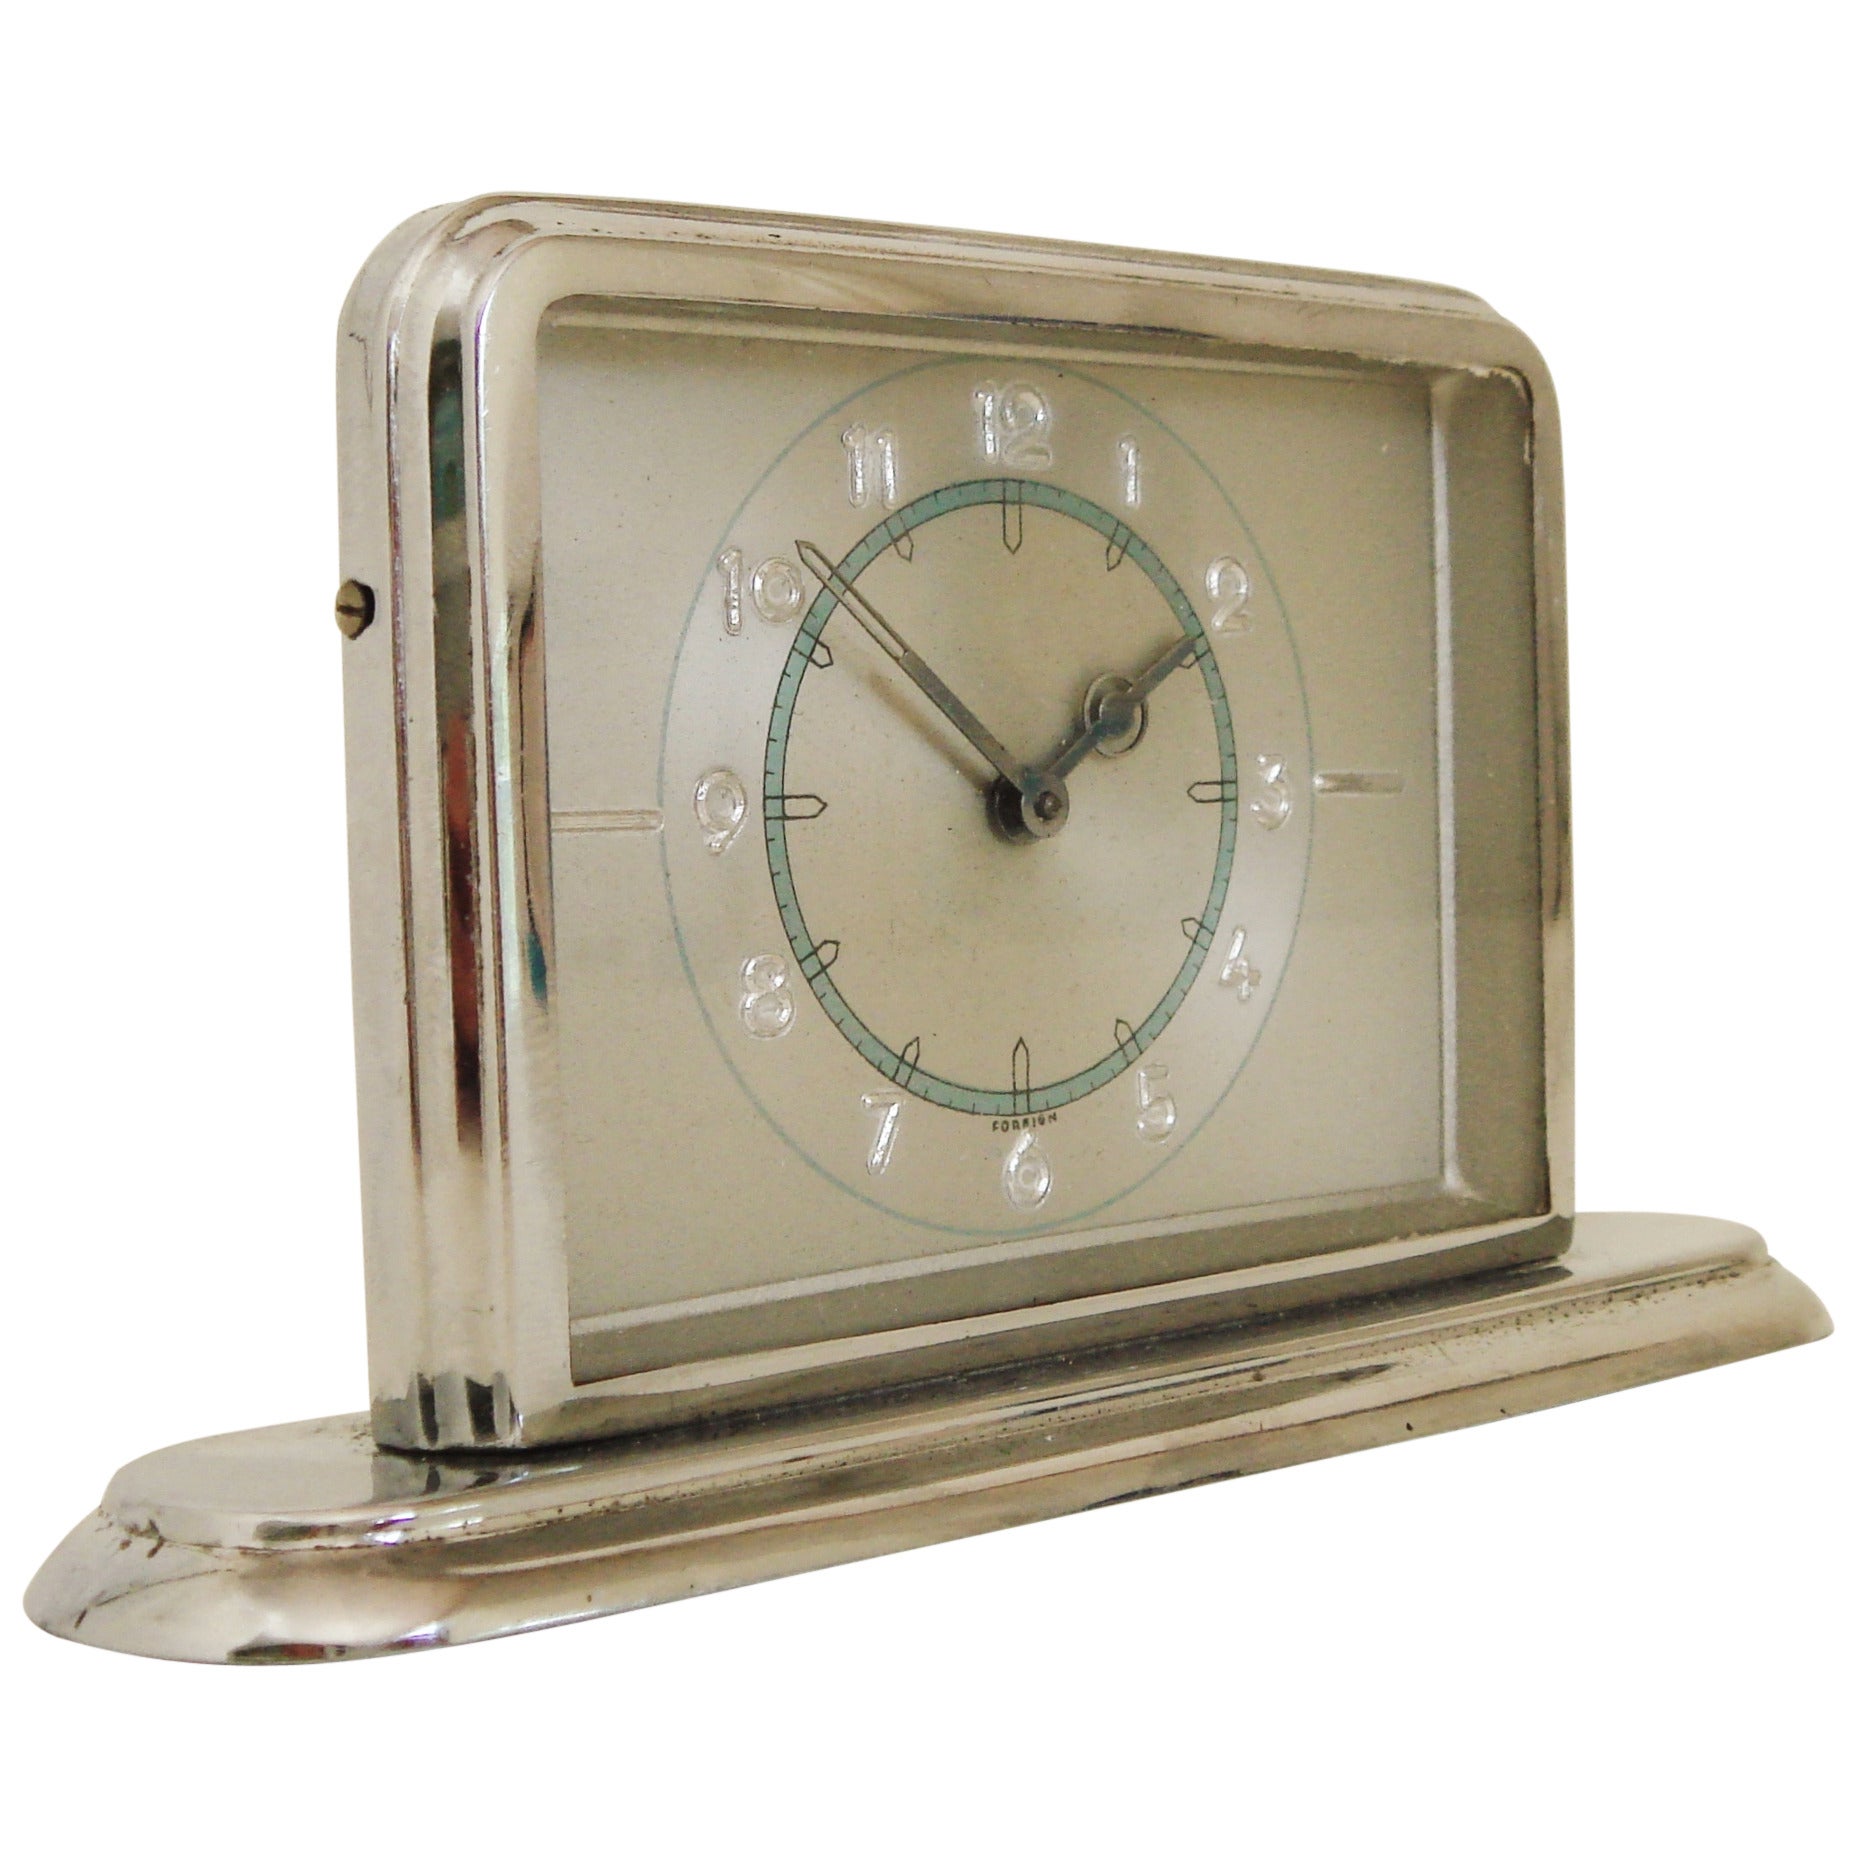 German Art Deco Small Chrome Desk Clock with Blue and Silver Accents